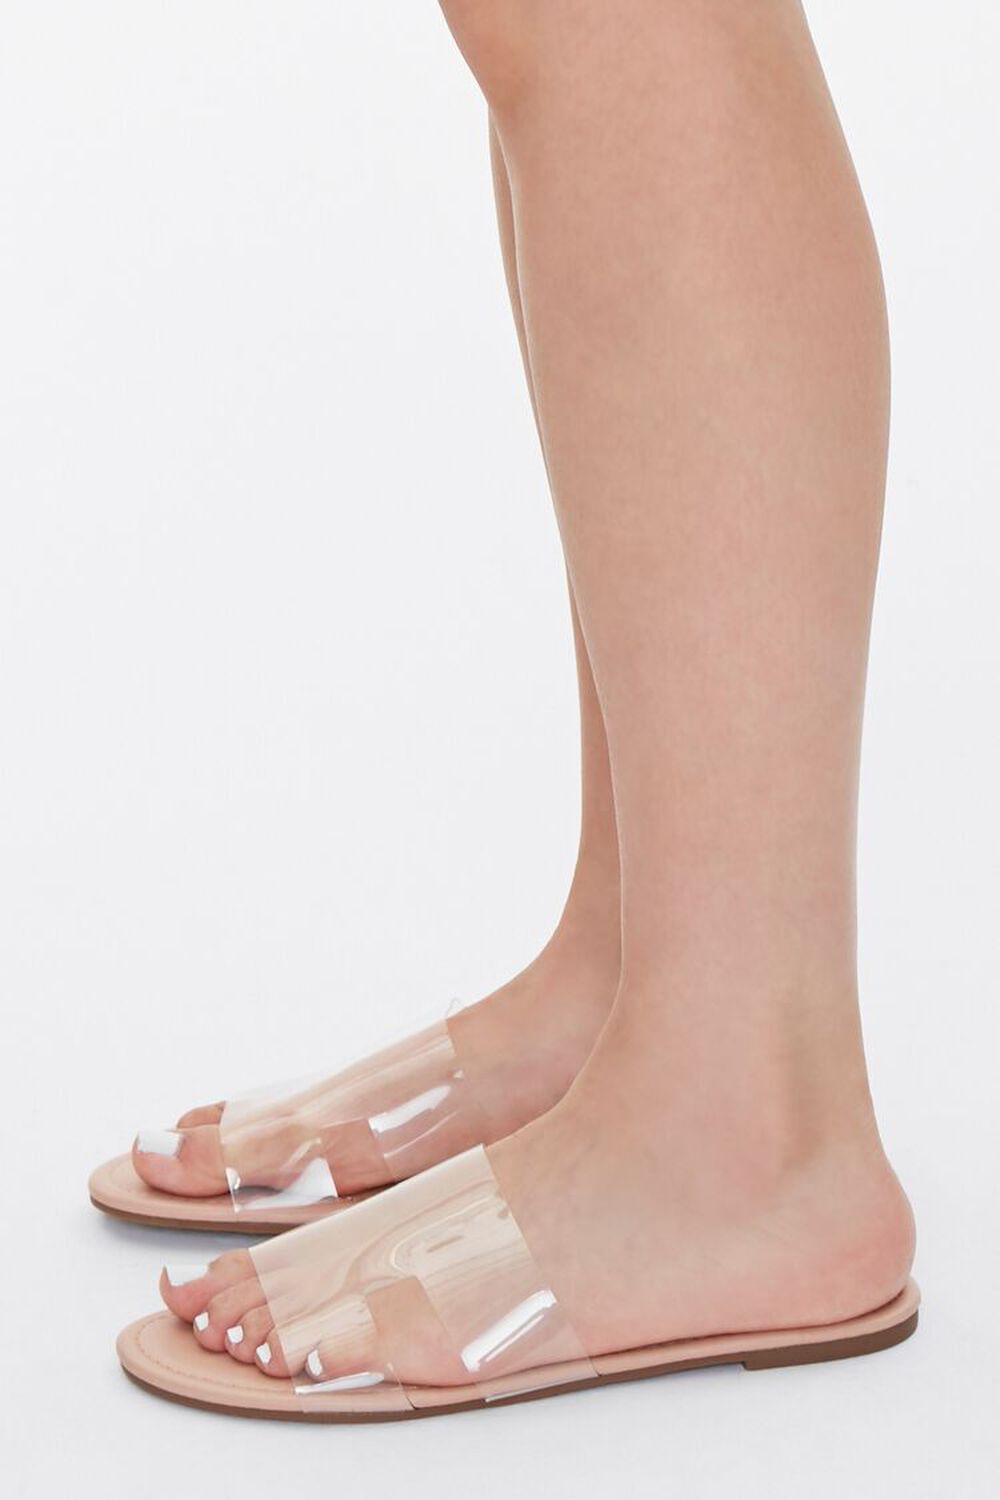 NUDE Faux Leather Clear-Strap Sandals, image 2